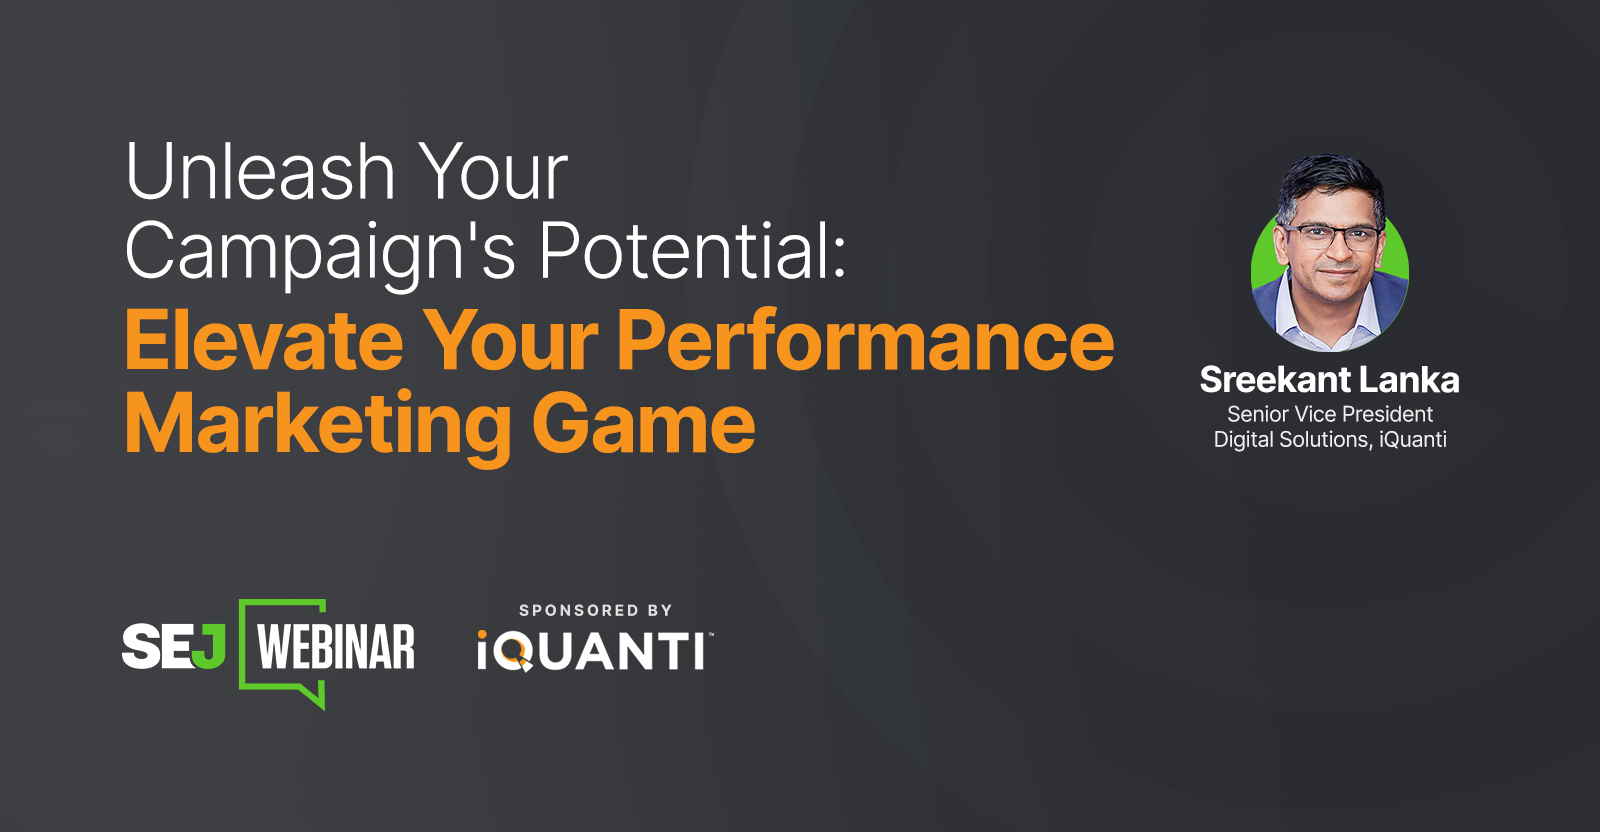 Unleash Your Campaign's Potential: Elevate Your Performance Marketing Game